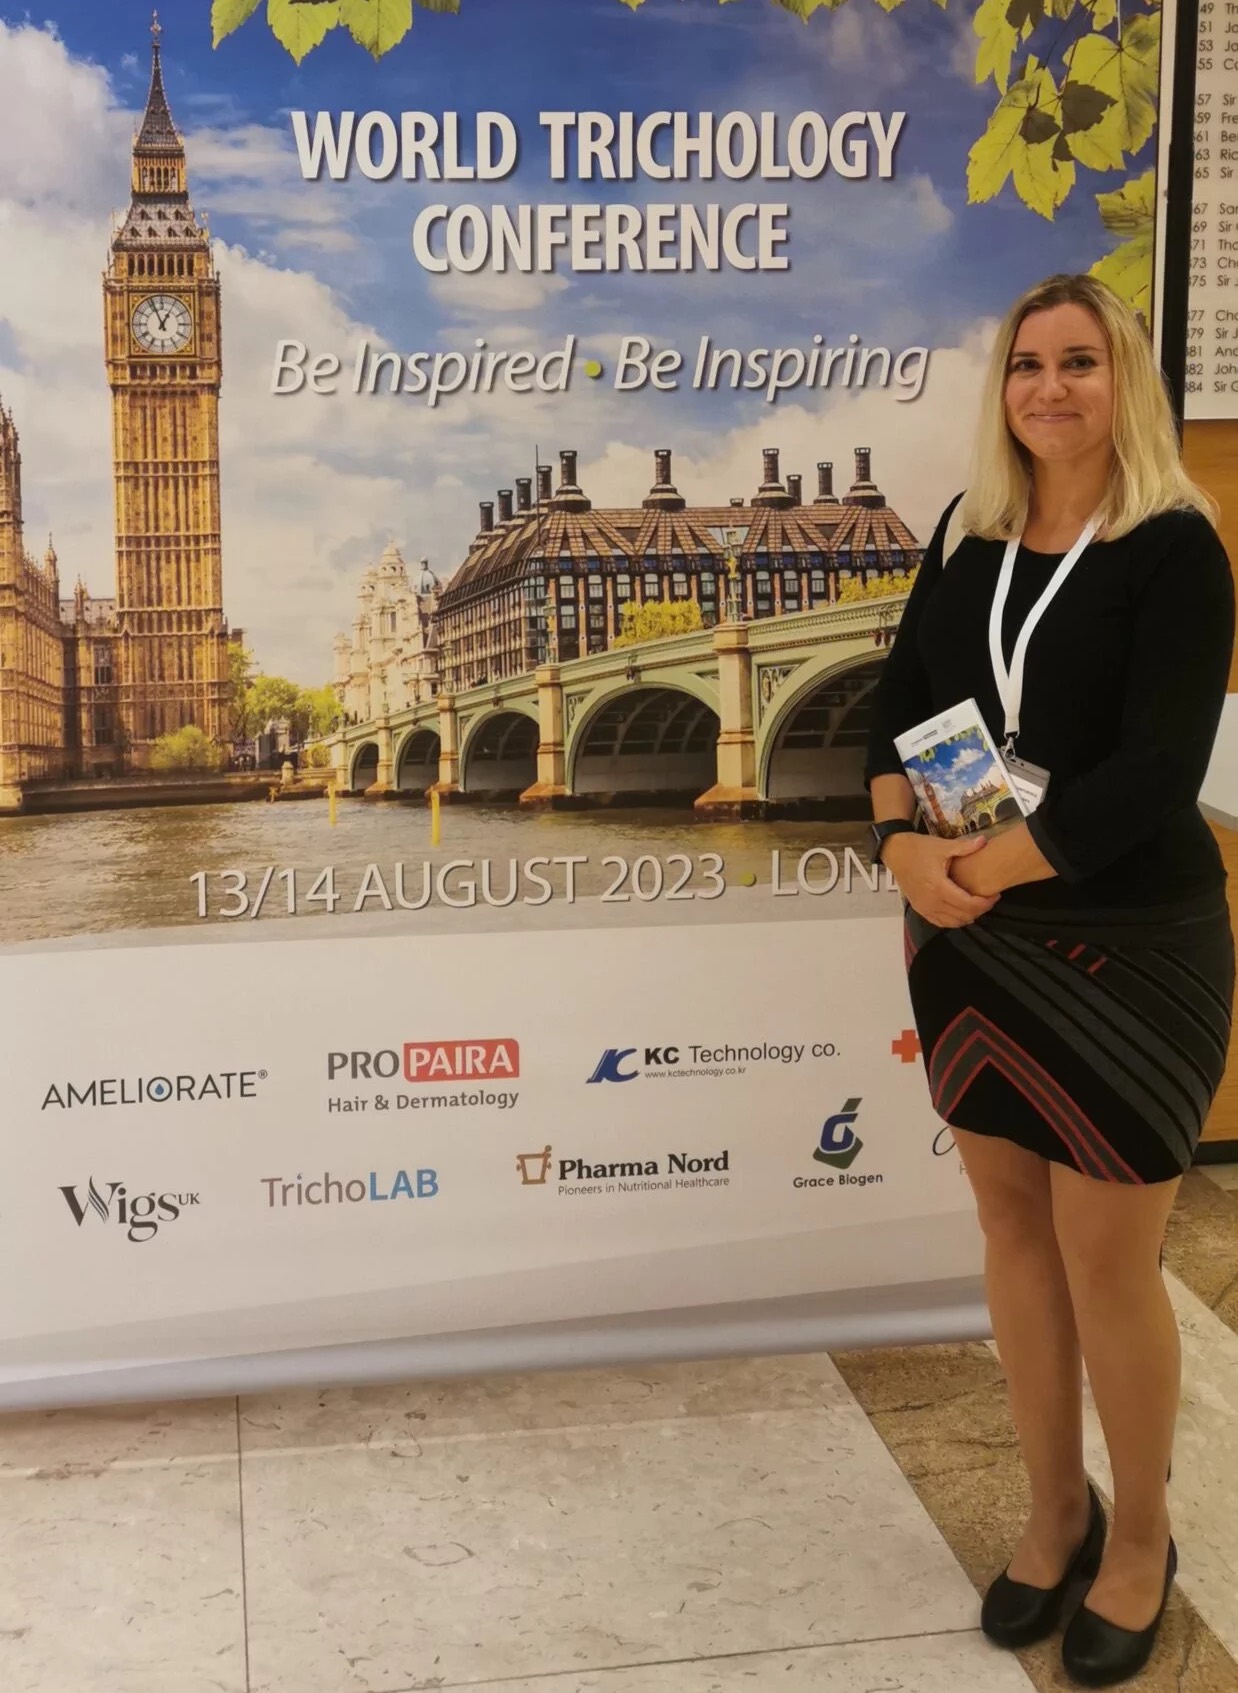 A woman stands smiling in front of a conference banner reading "World Trichology Conference" with an image of London landmarks. She wears a black outfit and holds a pamphlet on hair replacement.